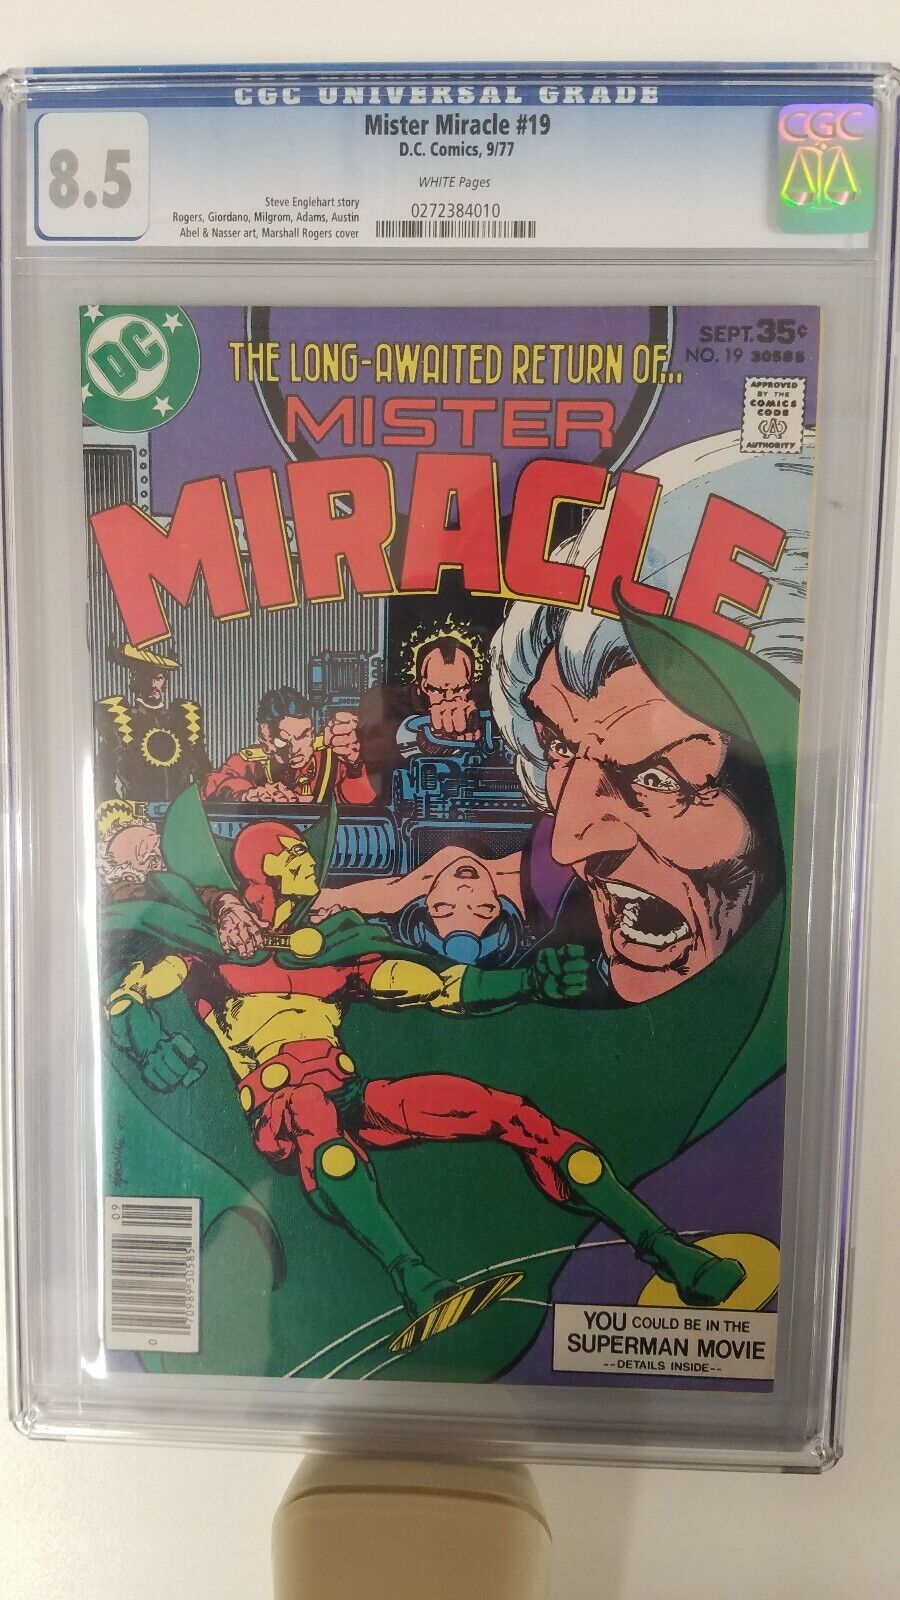 Mister Miracle #19 CGC 8.5 (Sep 1977, DC) Steve Englehart story, Rogers cover